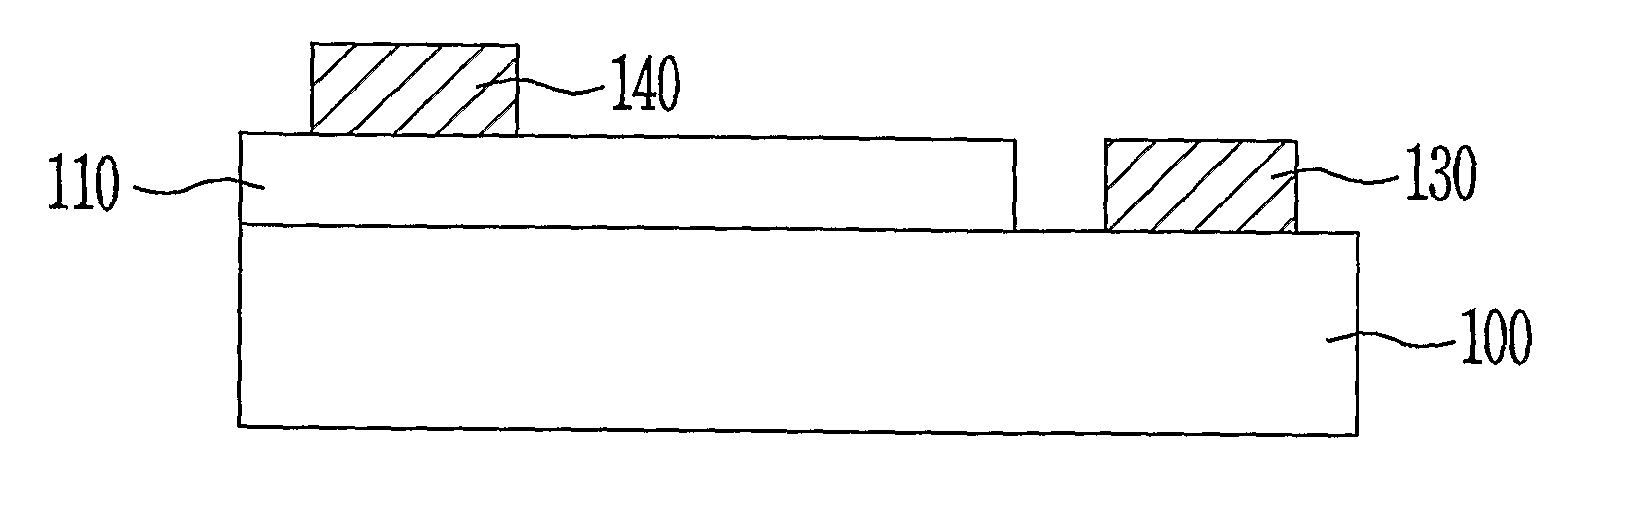 Silicon Nitride Layer for Light Emitting Device, Light Emitting Device Using the Same, and Method of Forming Silicon Nitride Layer for Light Emitting Device